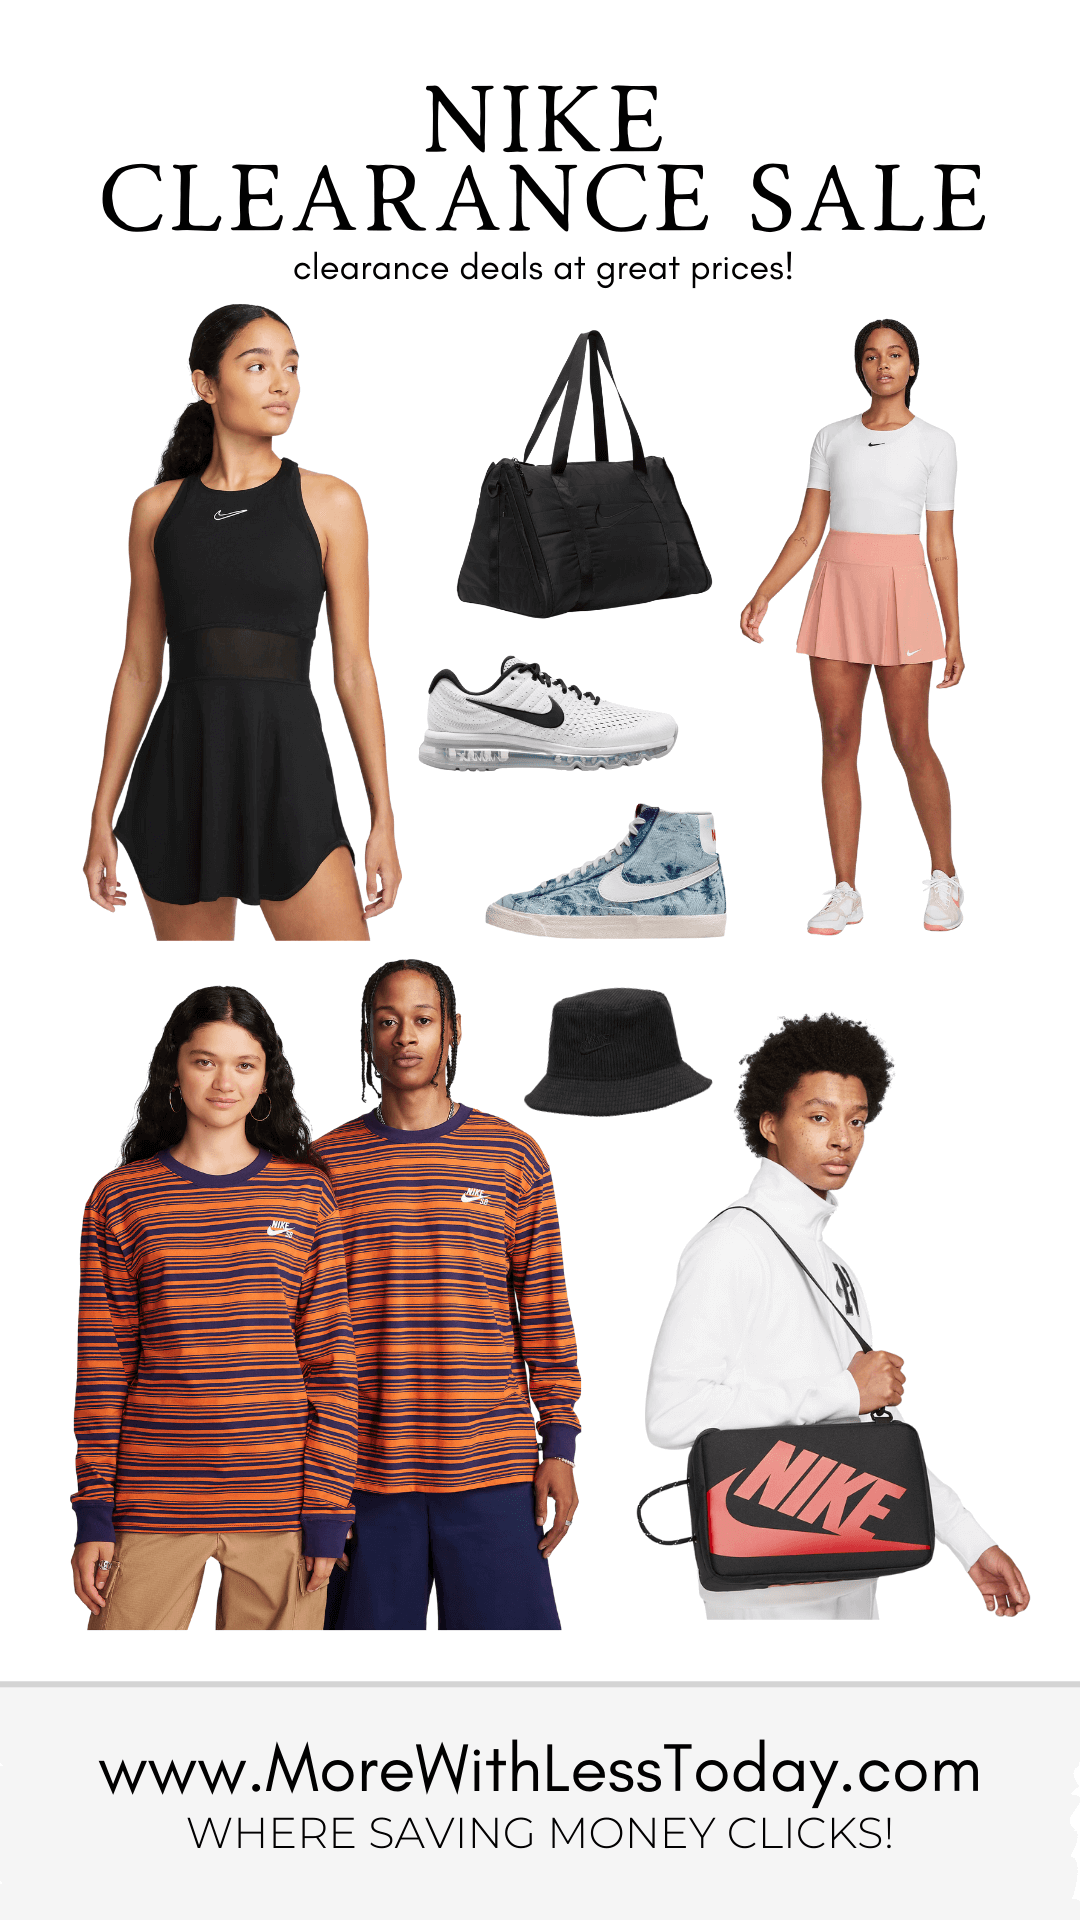 New items from Nike Clearance - PIN